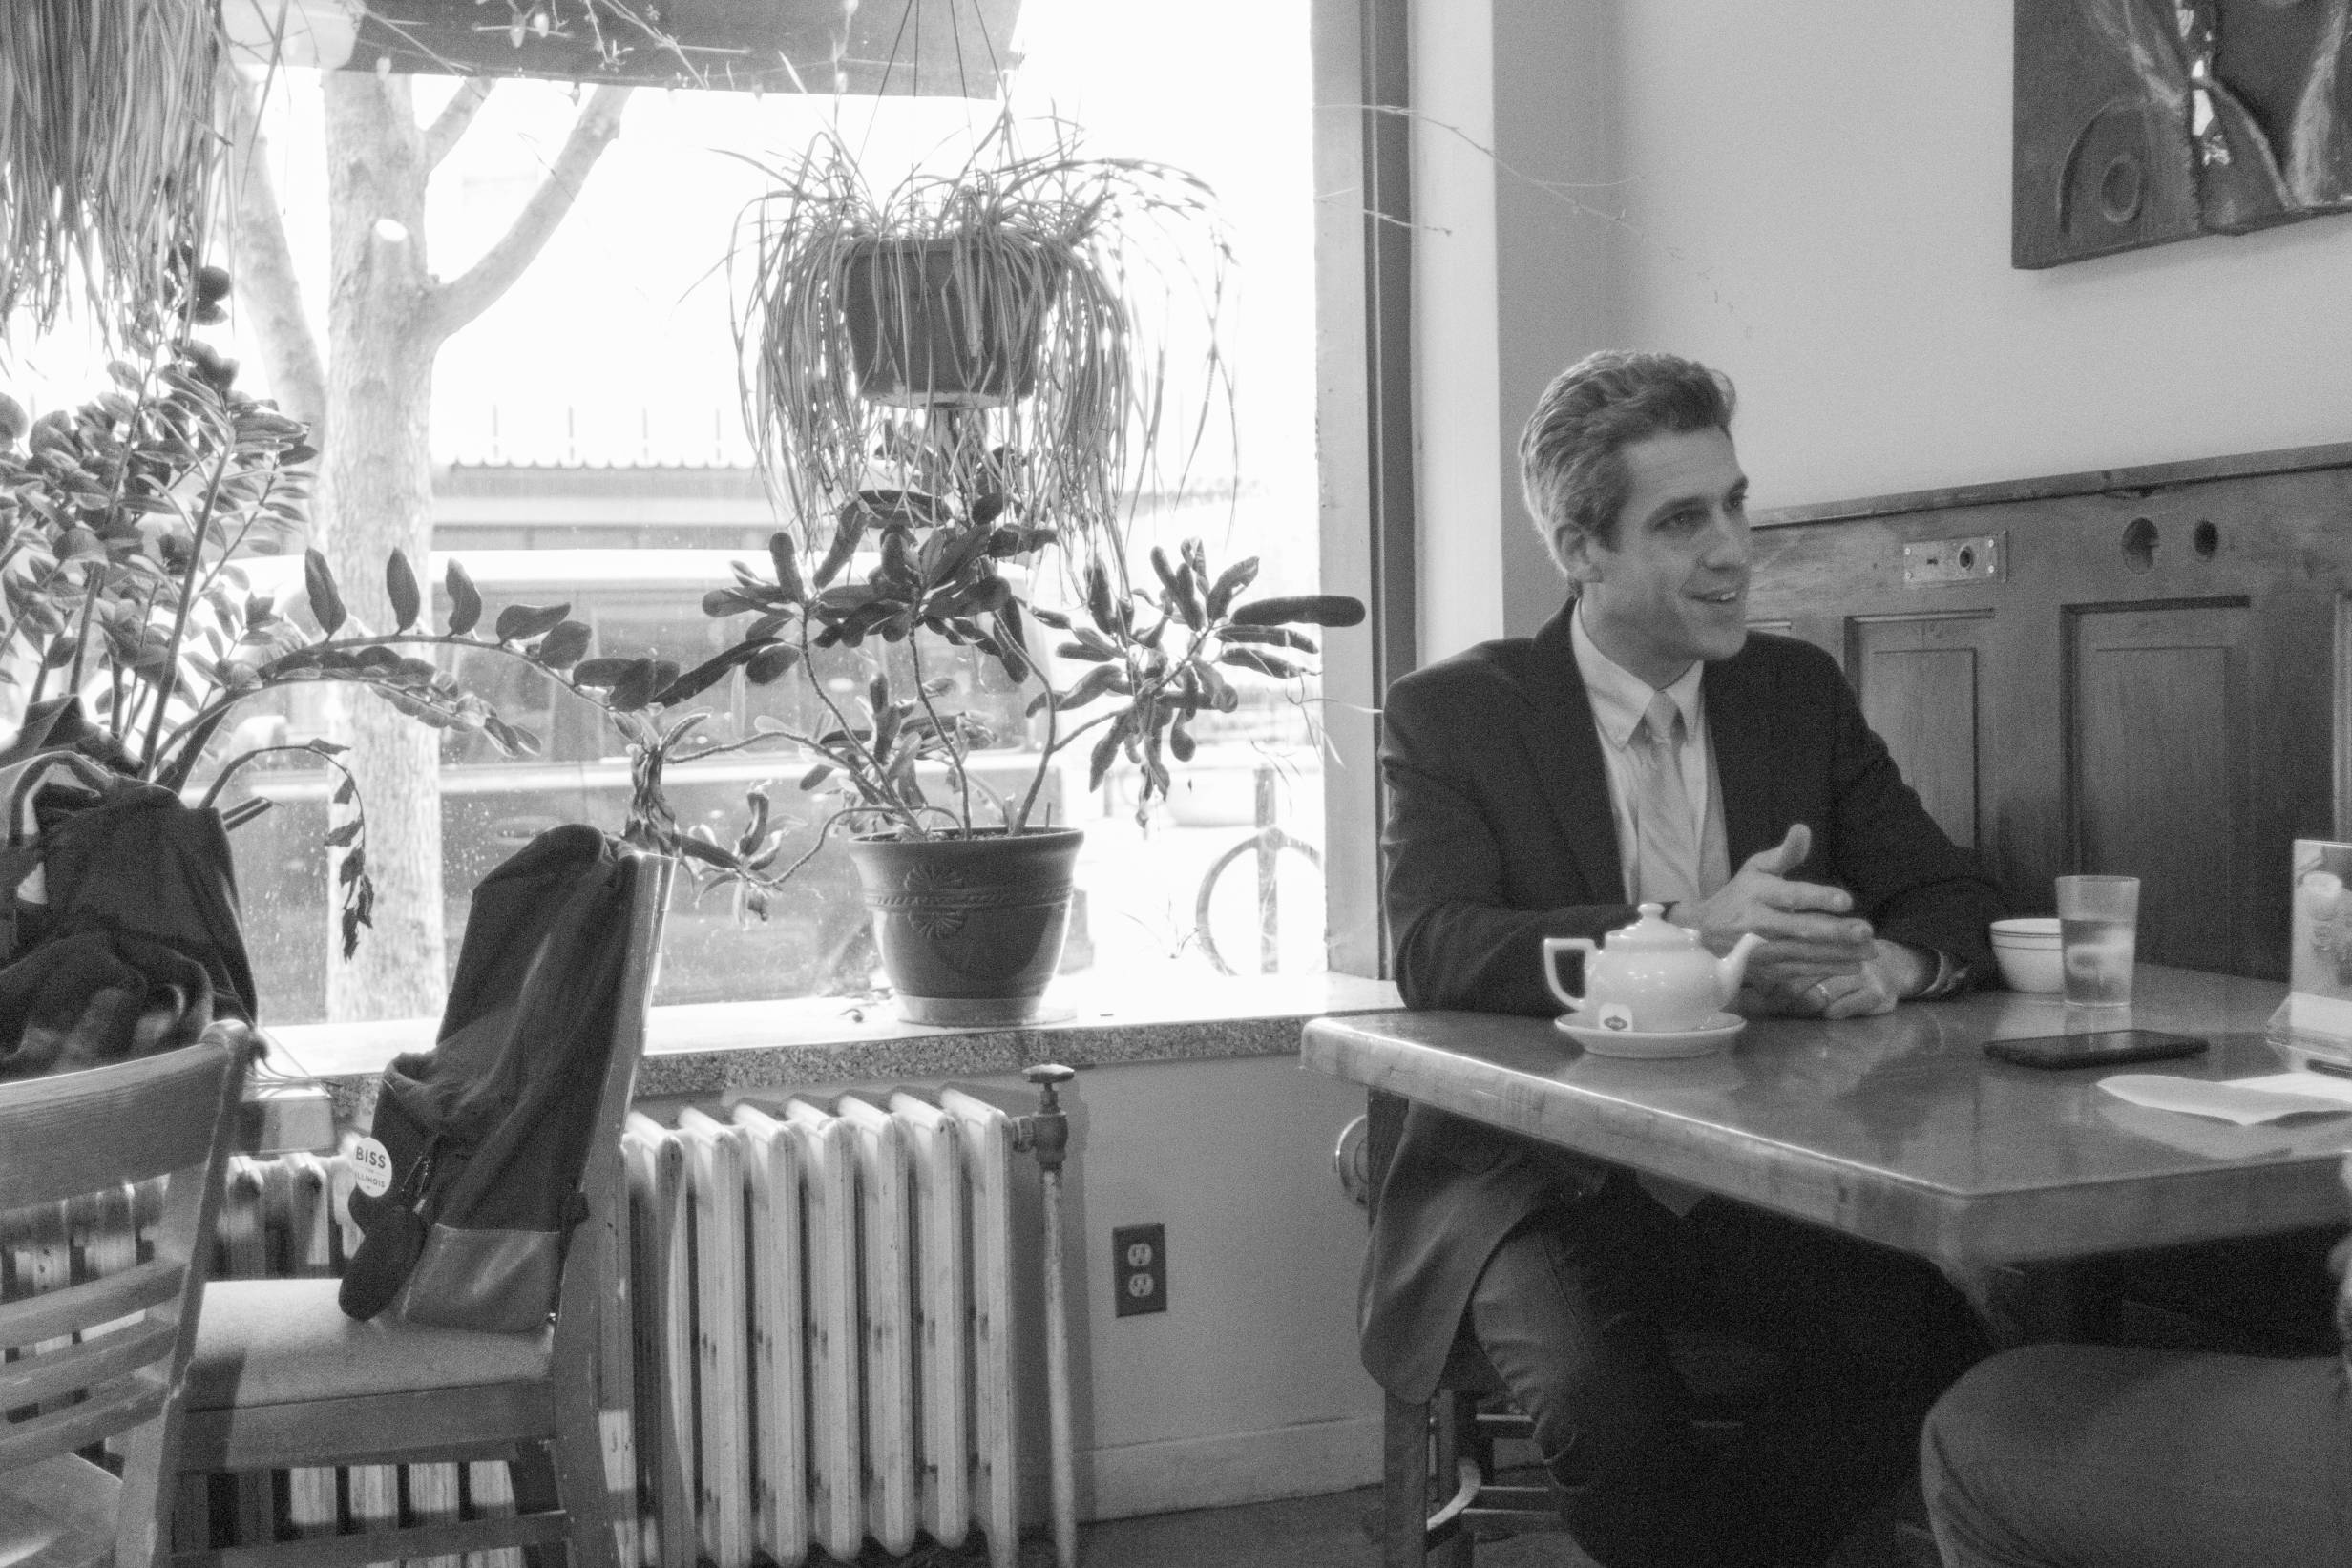 Trump, taxes, and trust: Our conversation with gubernatorial candidate Daniel Biss